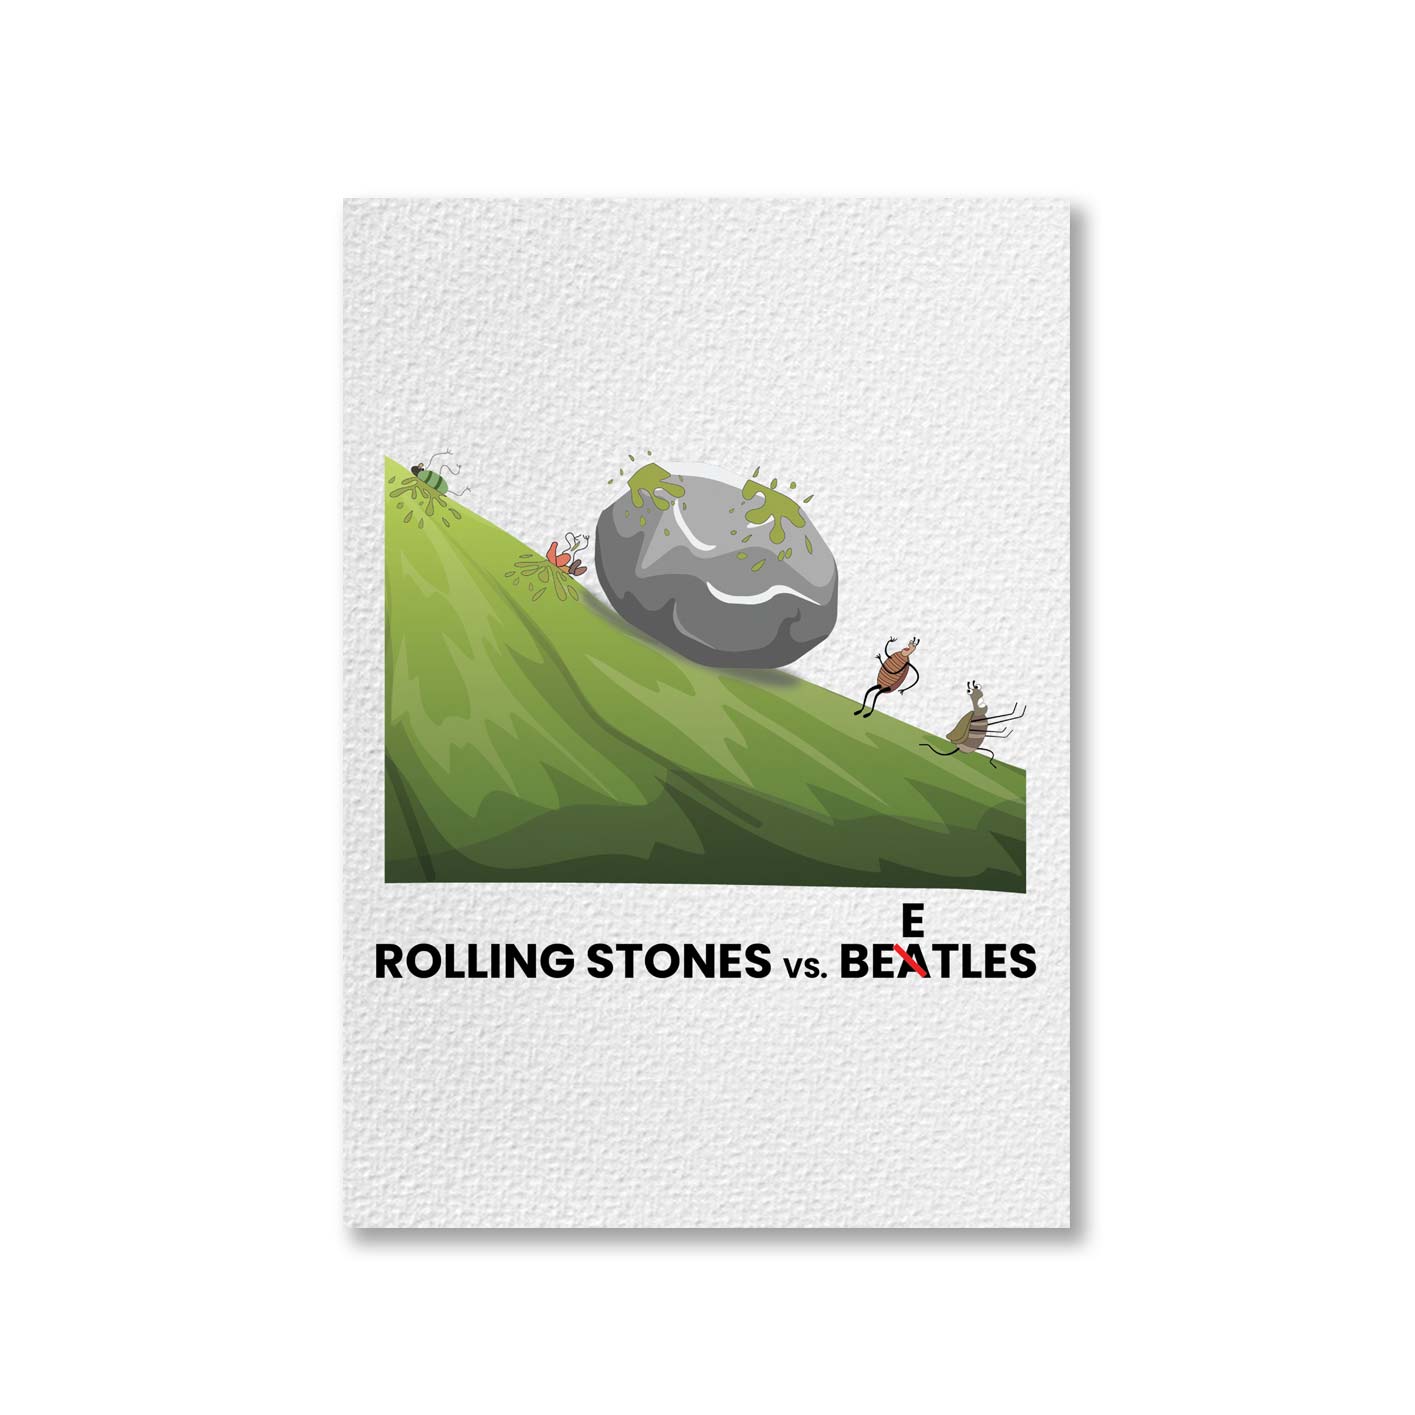 the rolling stones rolling stones vs. beetles poster wall art buy online united states of america usa the banyan tee tbt a4